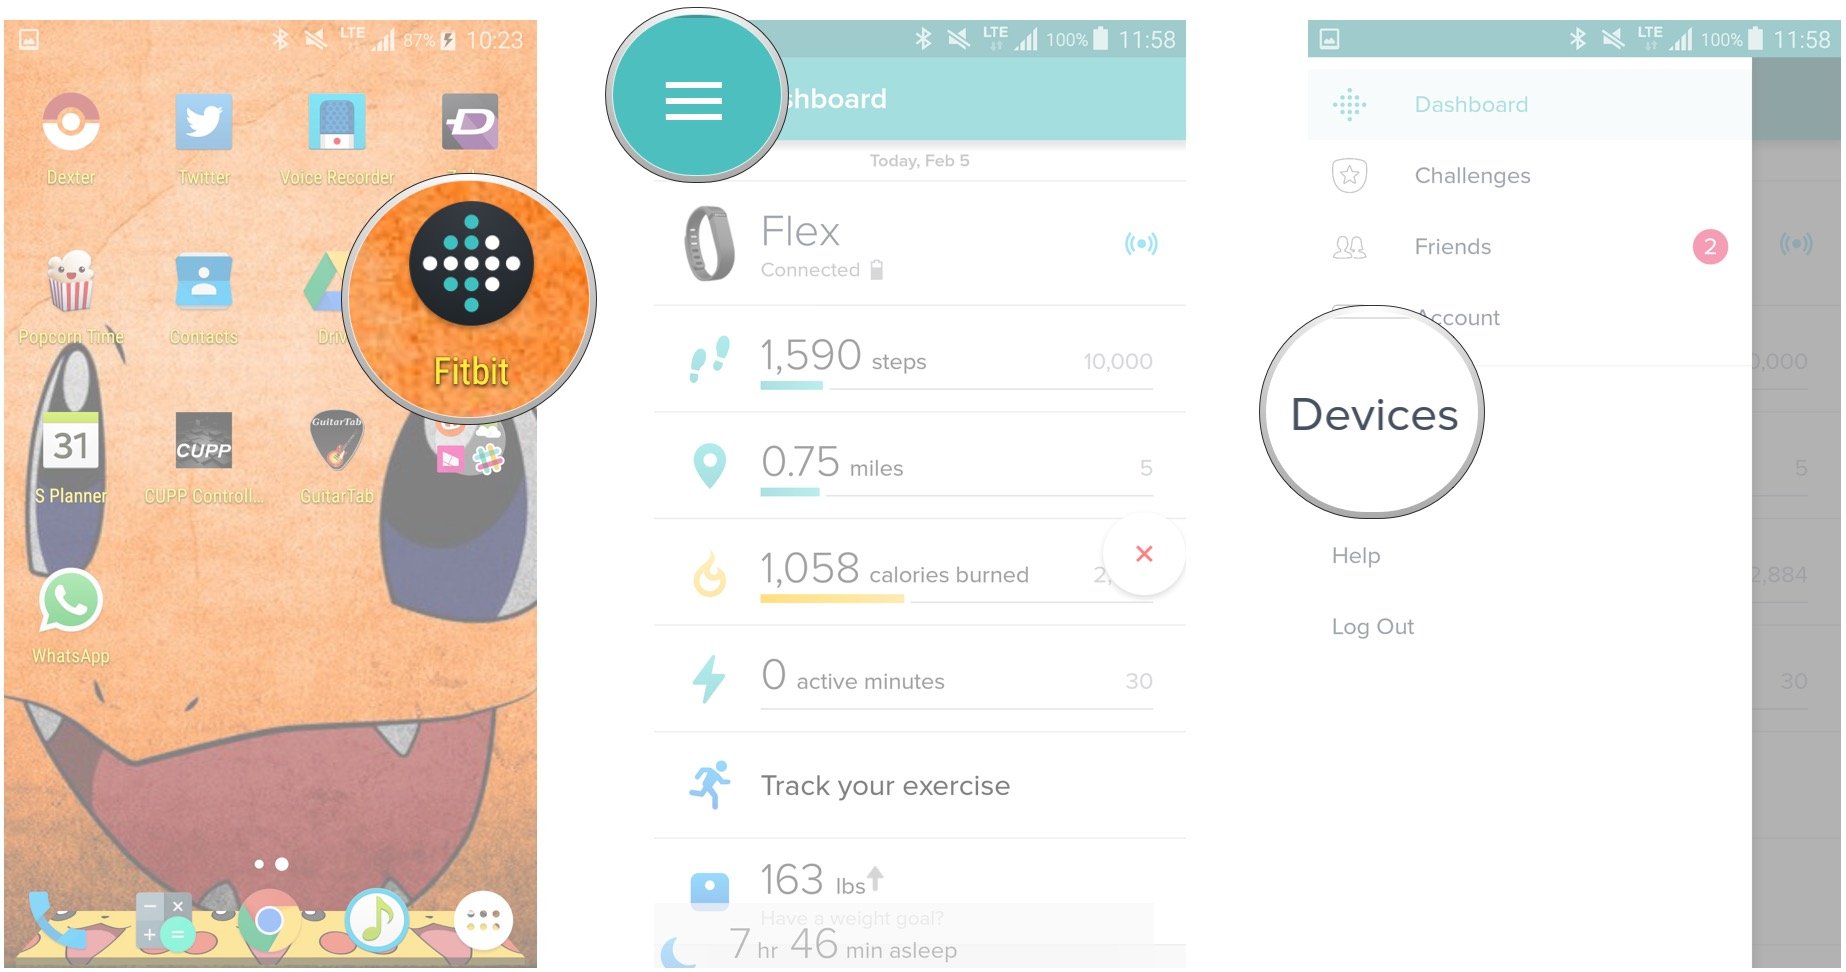 how to set up a fitbit account for my child